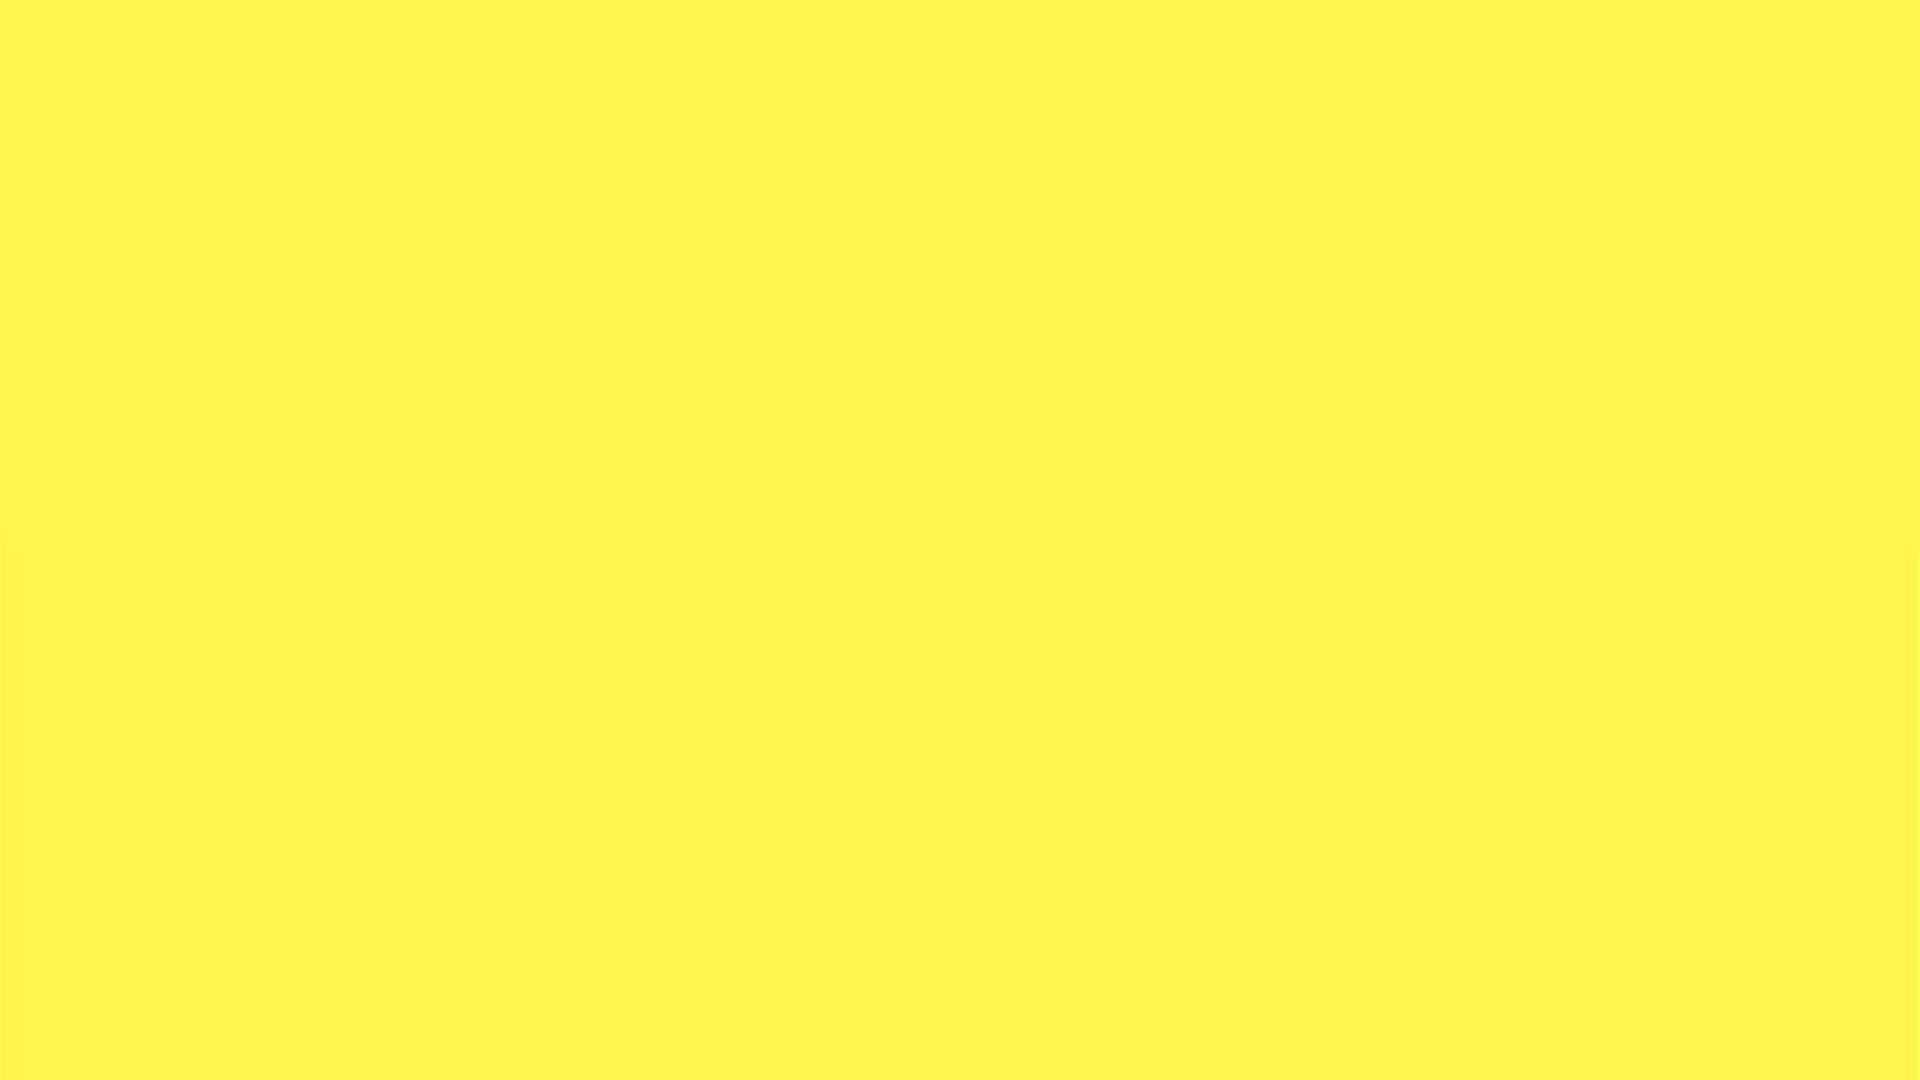 Computer Wallpapers Plain Yellow with image resolution 1920x1080 pixel. You can use this wallpaper as background for your desktop Computer Screensavers, Android or iPhone smartphones